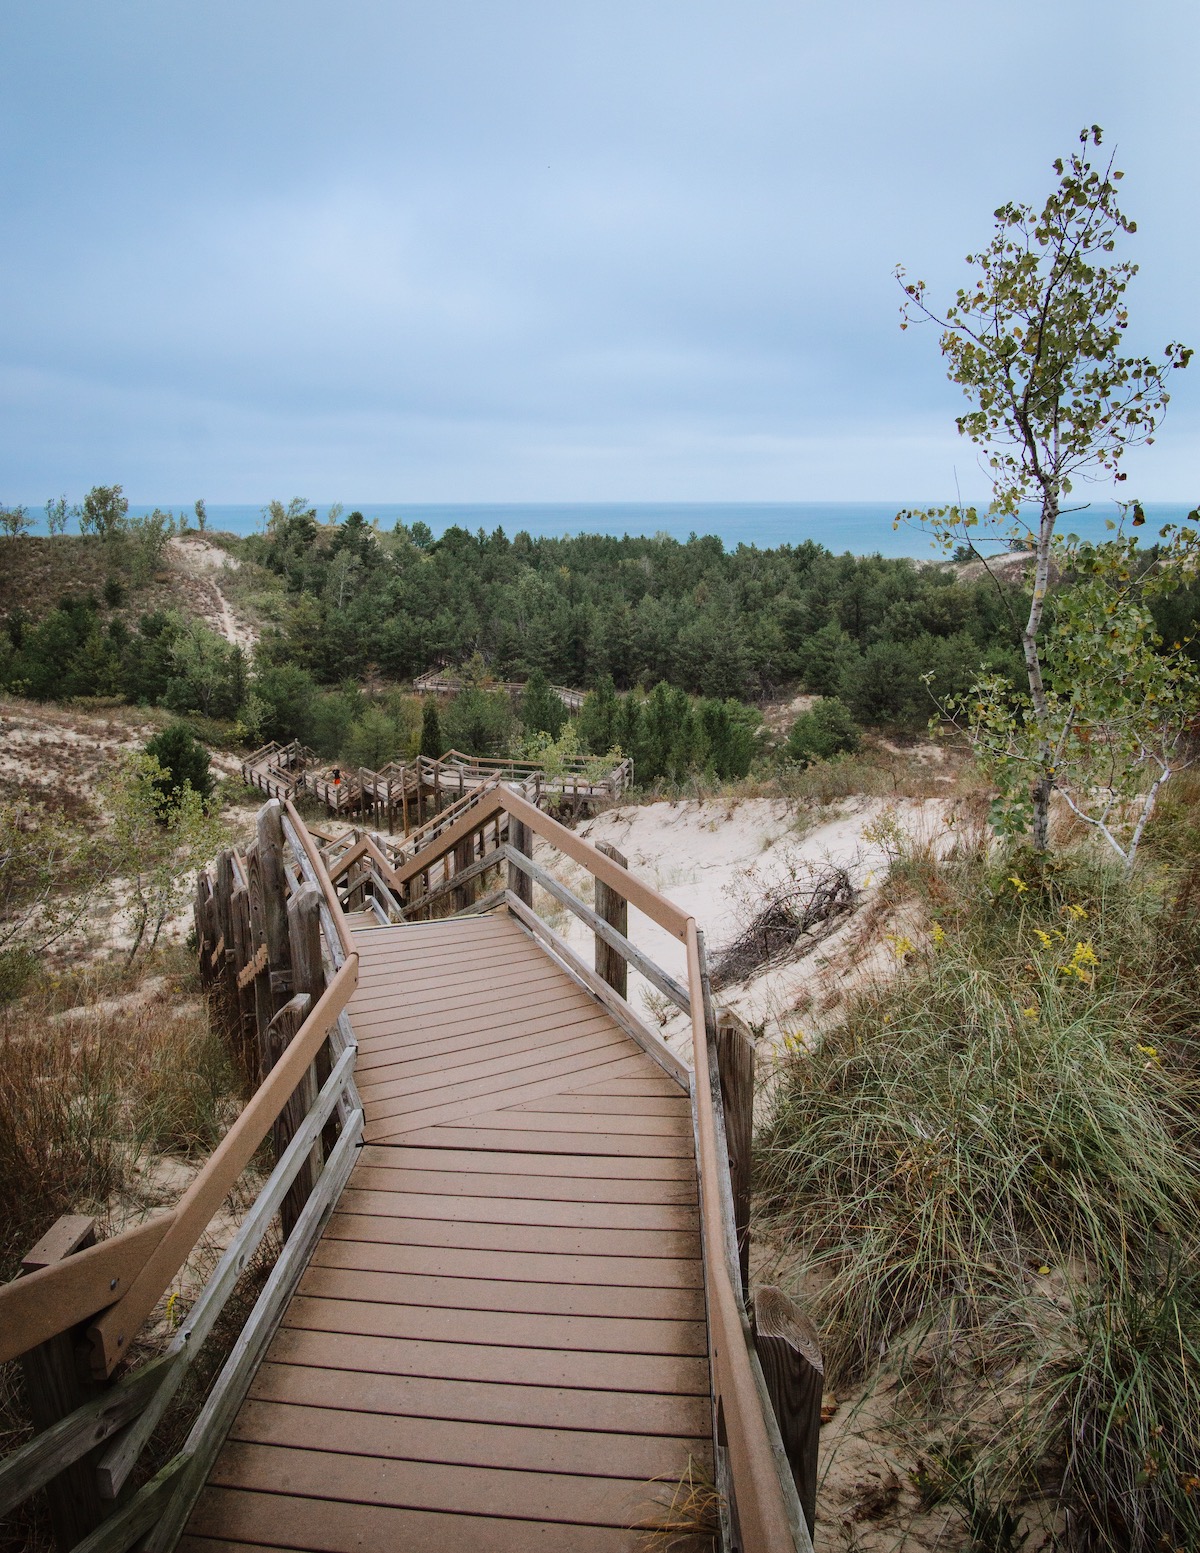 Views from the boardwalk of the Dune Succession Trail